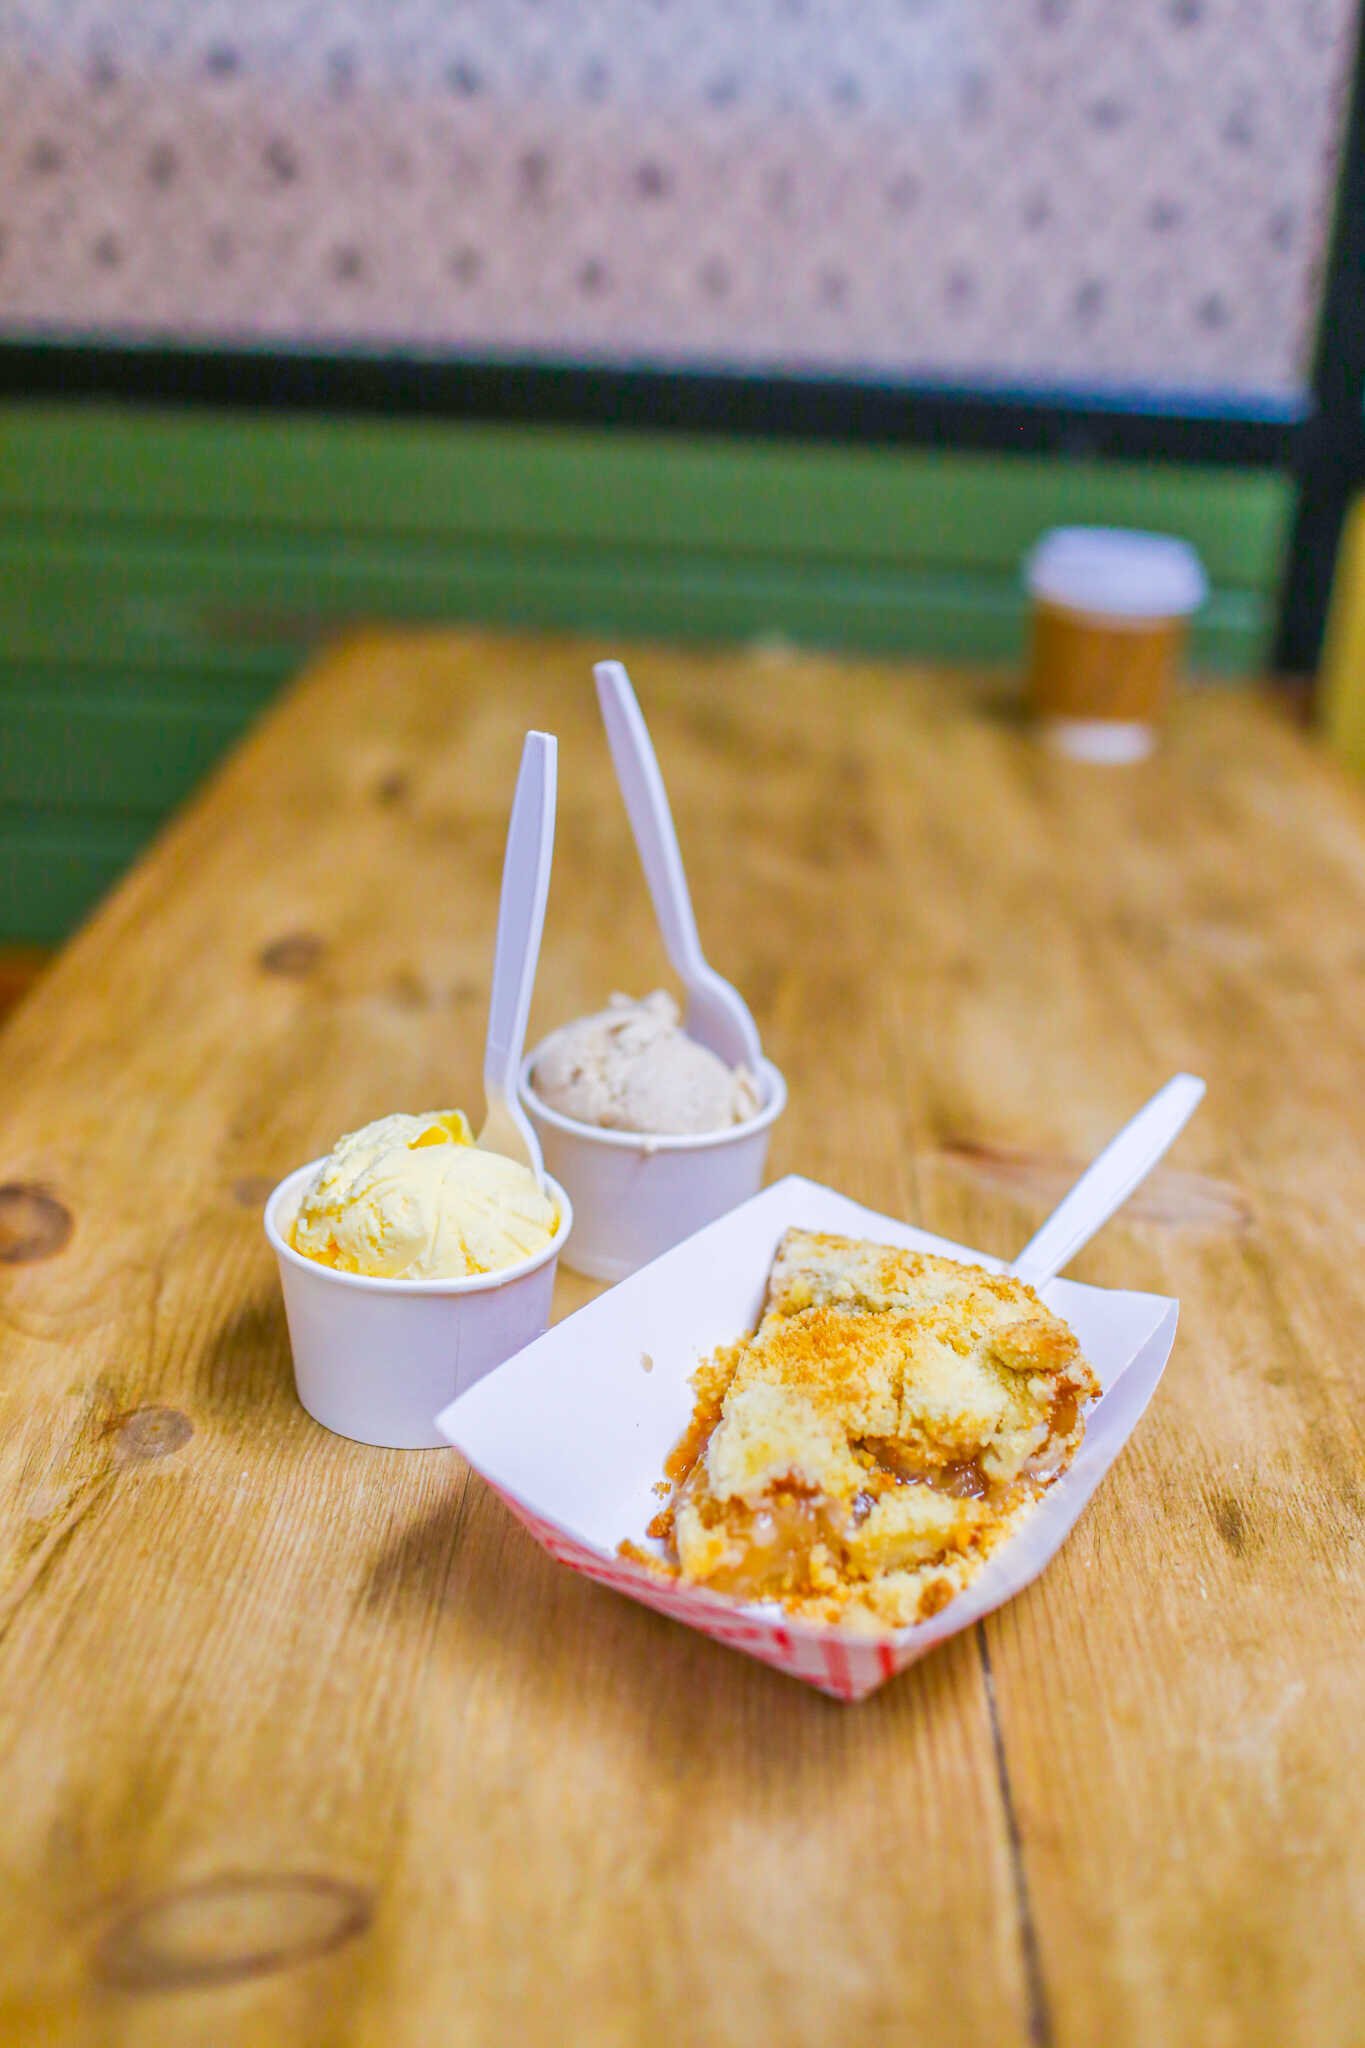 The Complete Travel Guide to Julian, California - Cinnamon ice cream, vanilla ice cream and apple crumble pie from Mom’s Pie House.